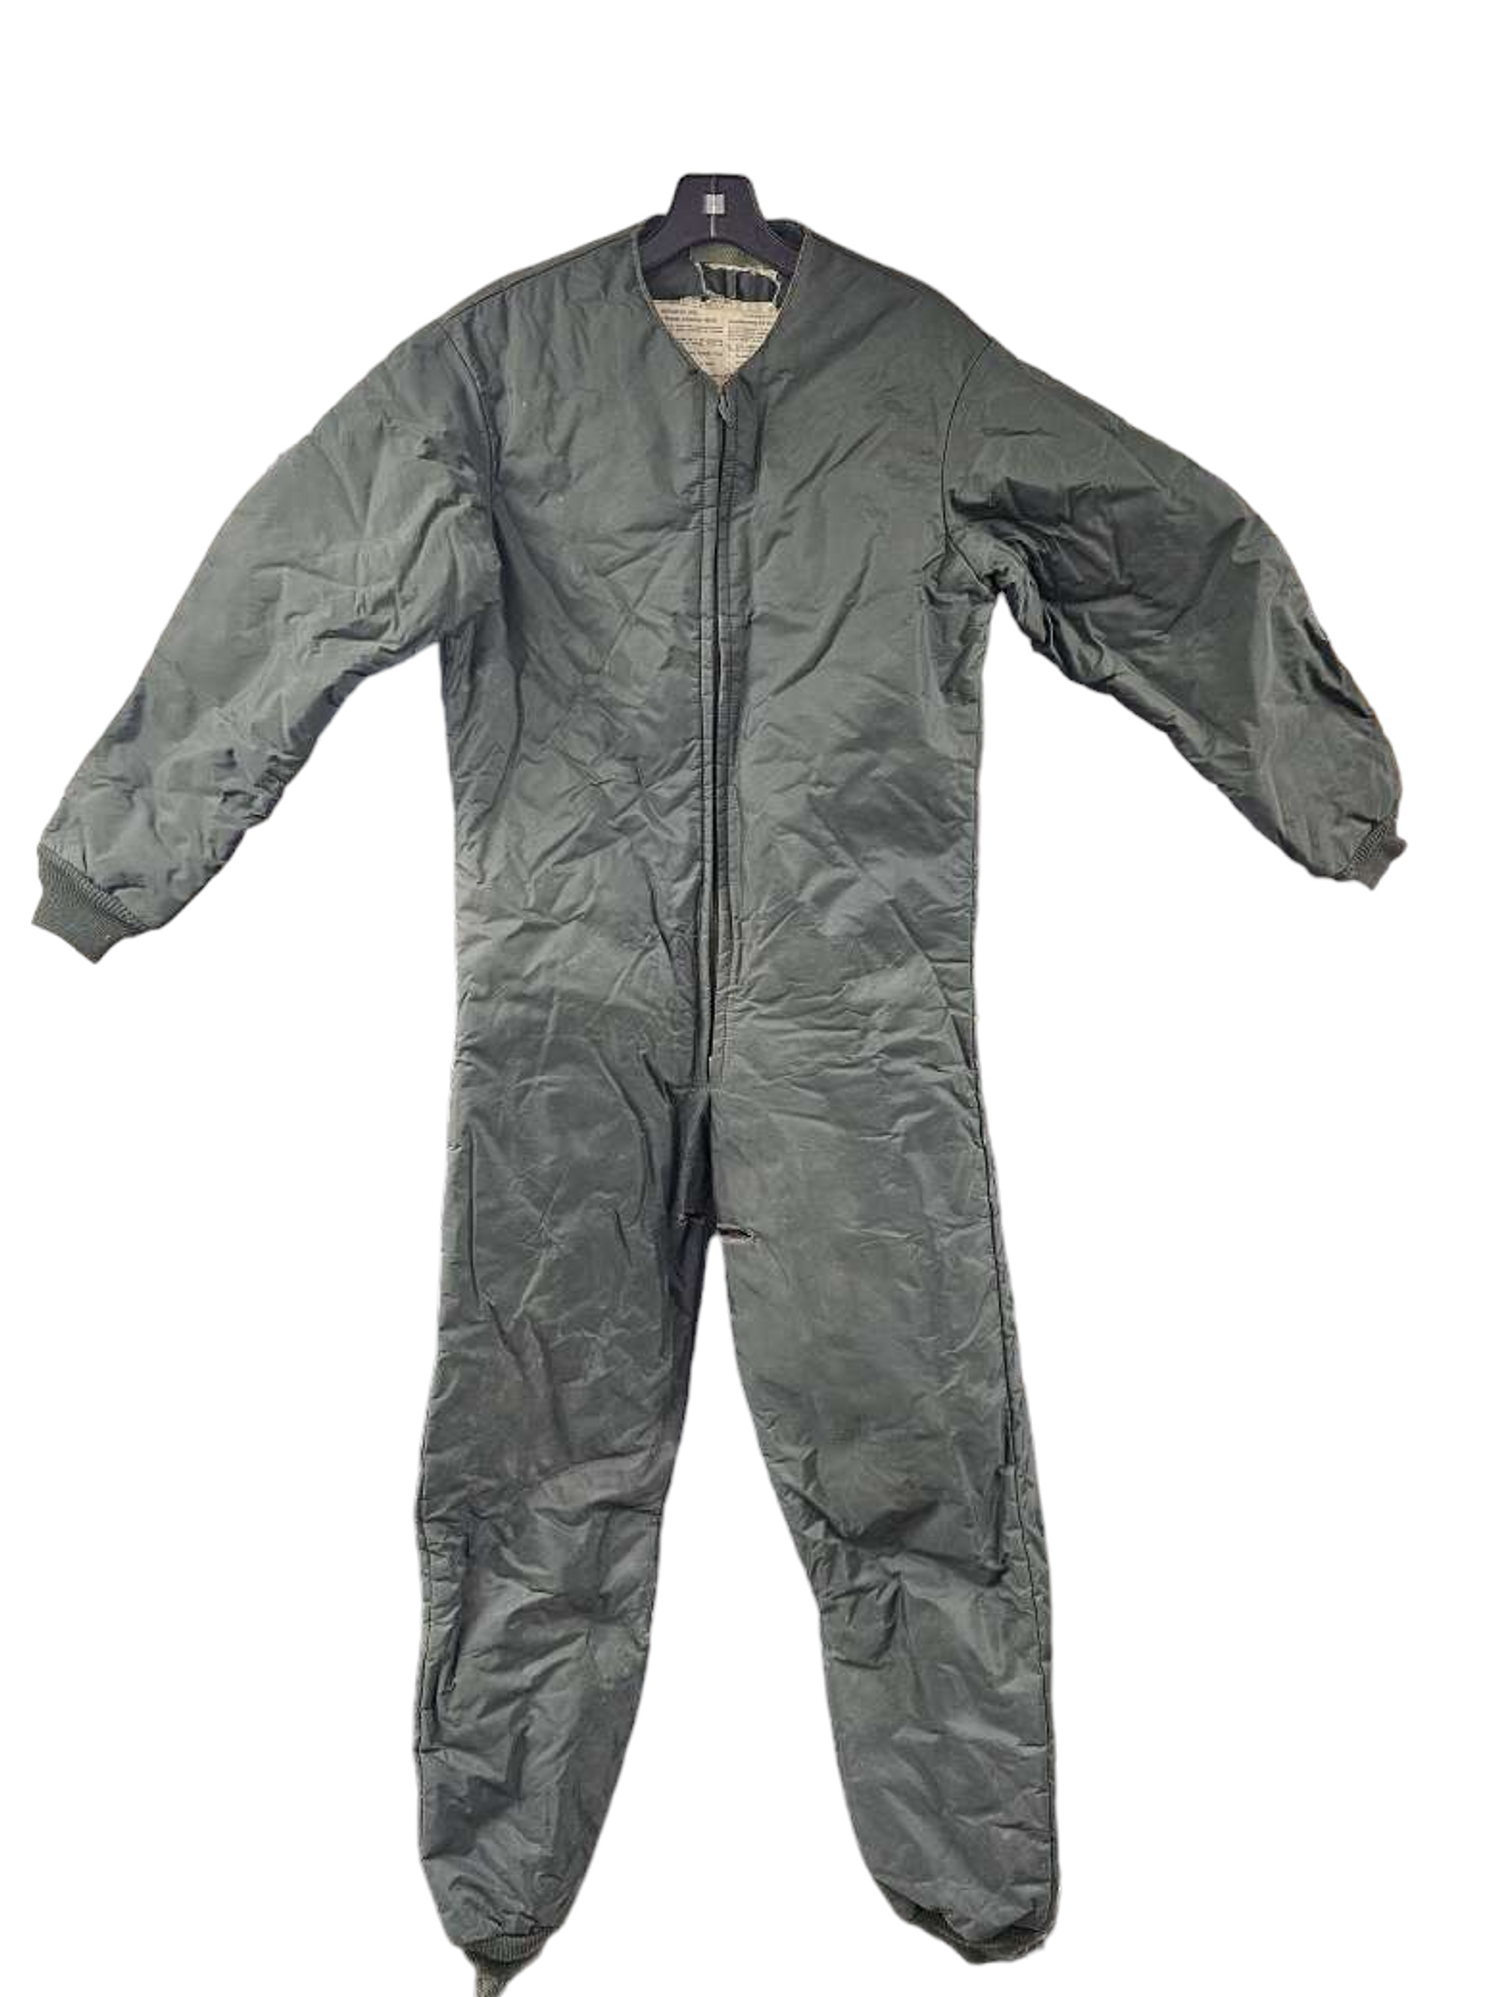 Canadian Armed Forces 1974 Aircrew Immersion Suit